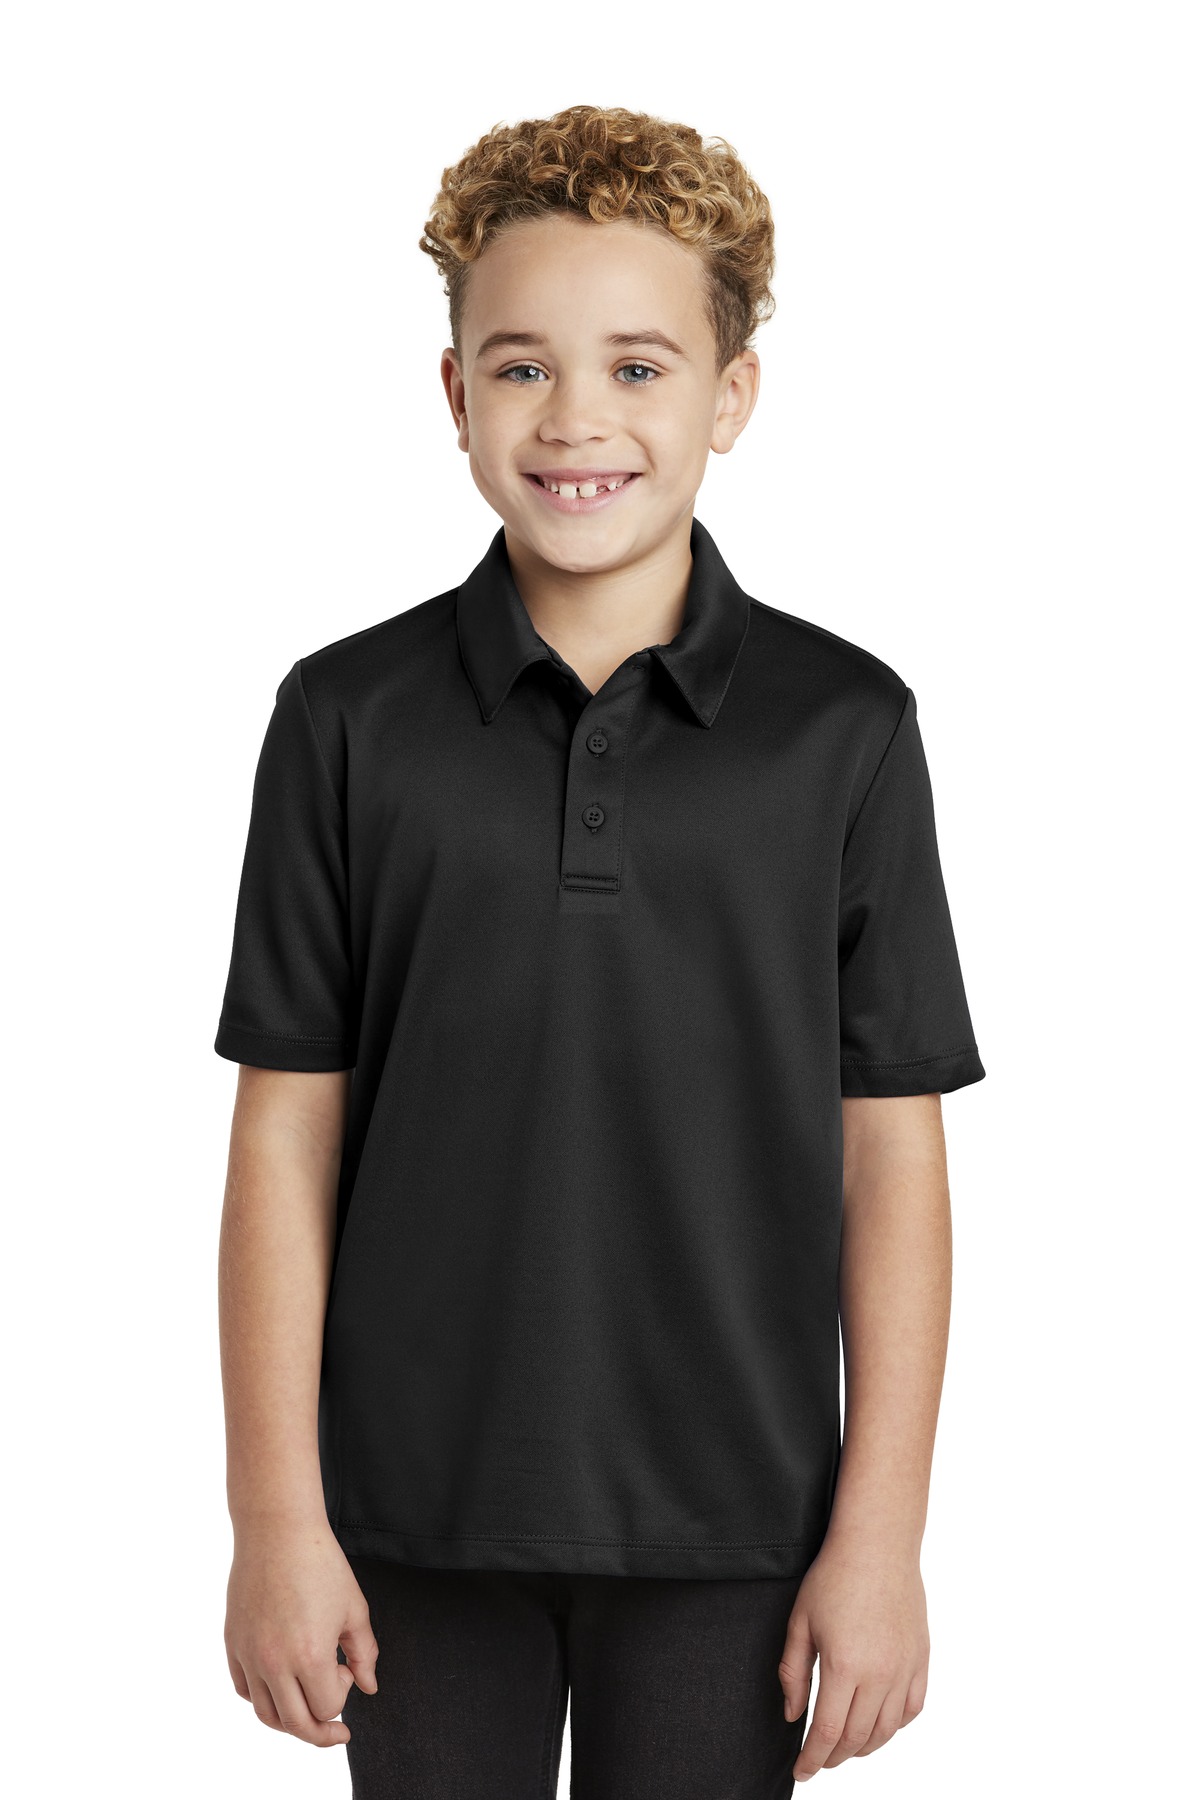 Port Authority Youth Silk Touch Performance Polo-Port Authority